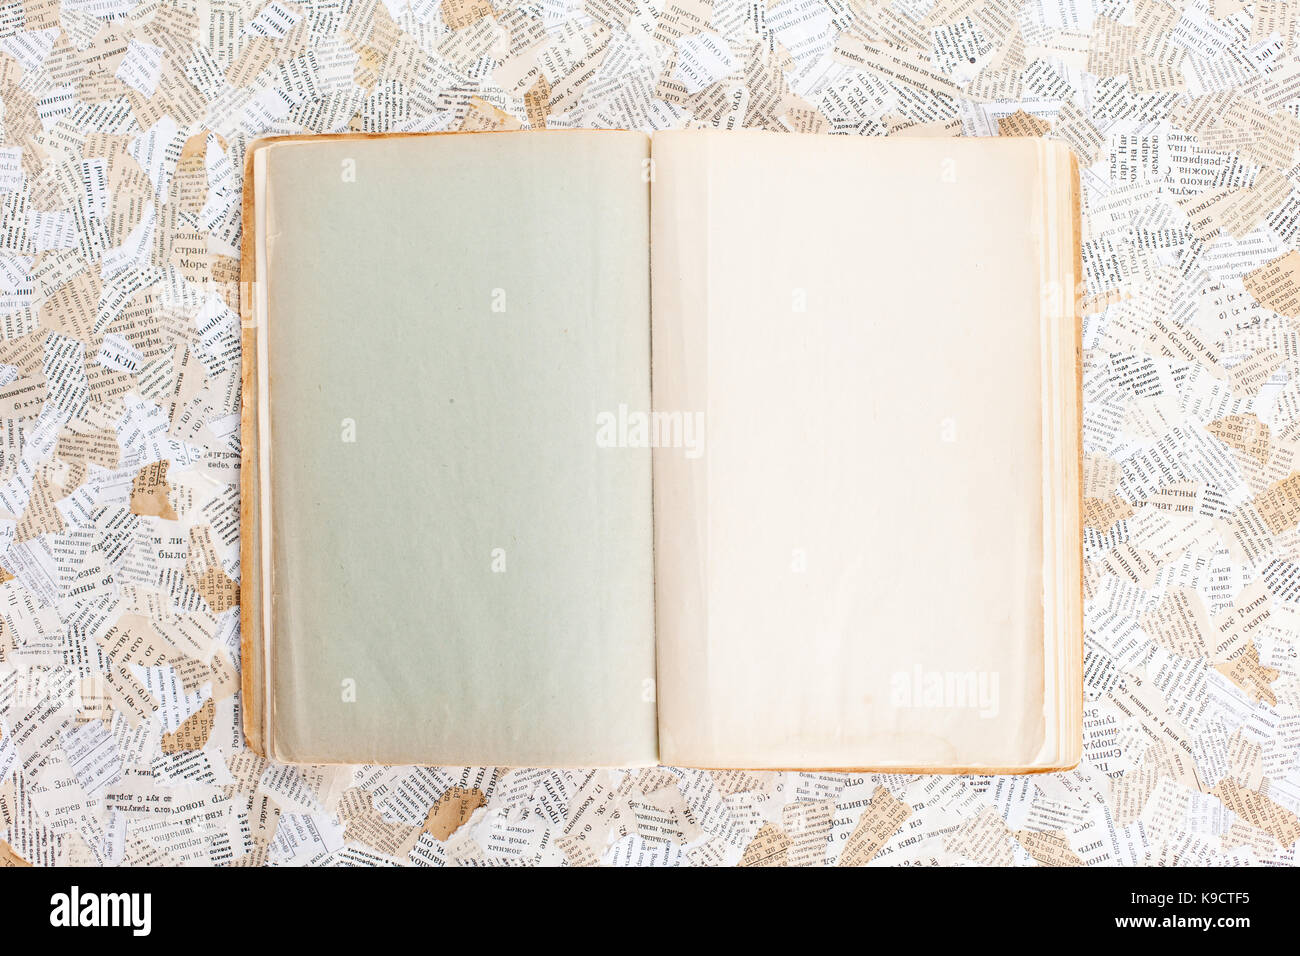 Old Opened Book Blank Pages Wooden Background Stock Photo by ©YAYImages  261914272